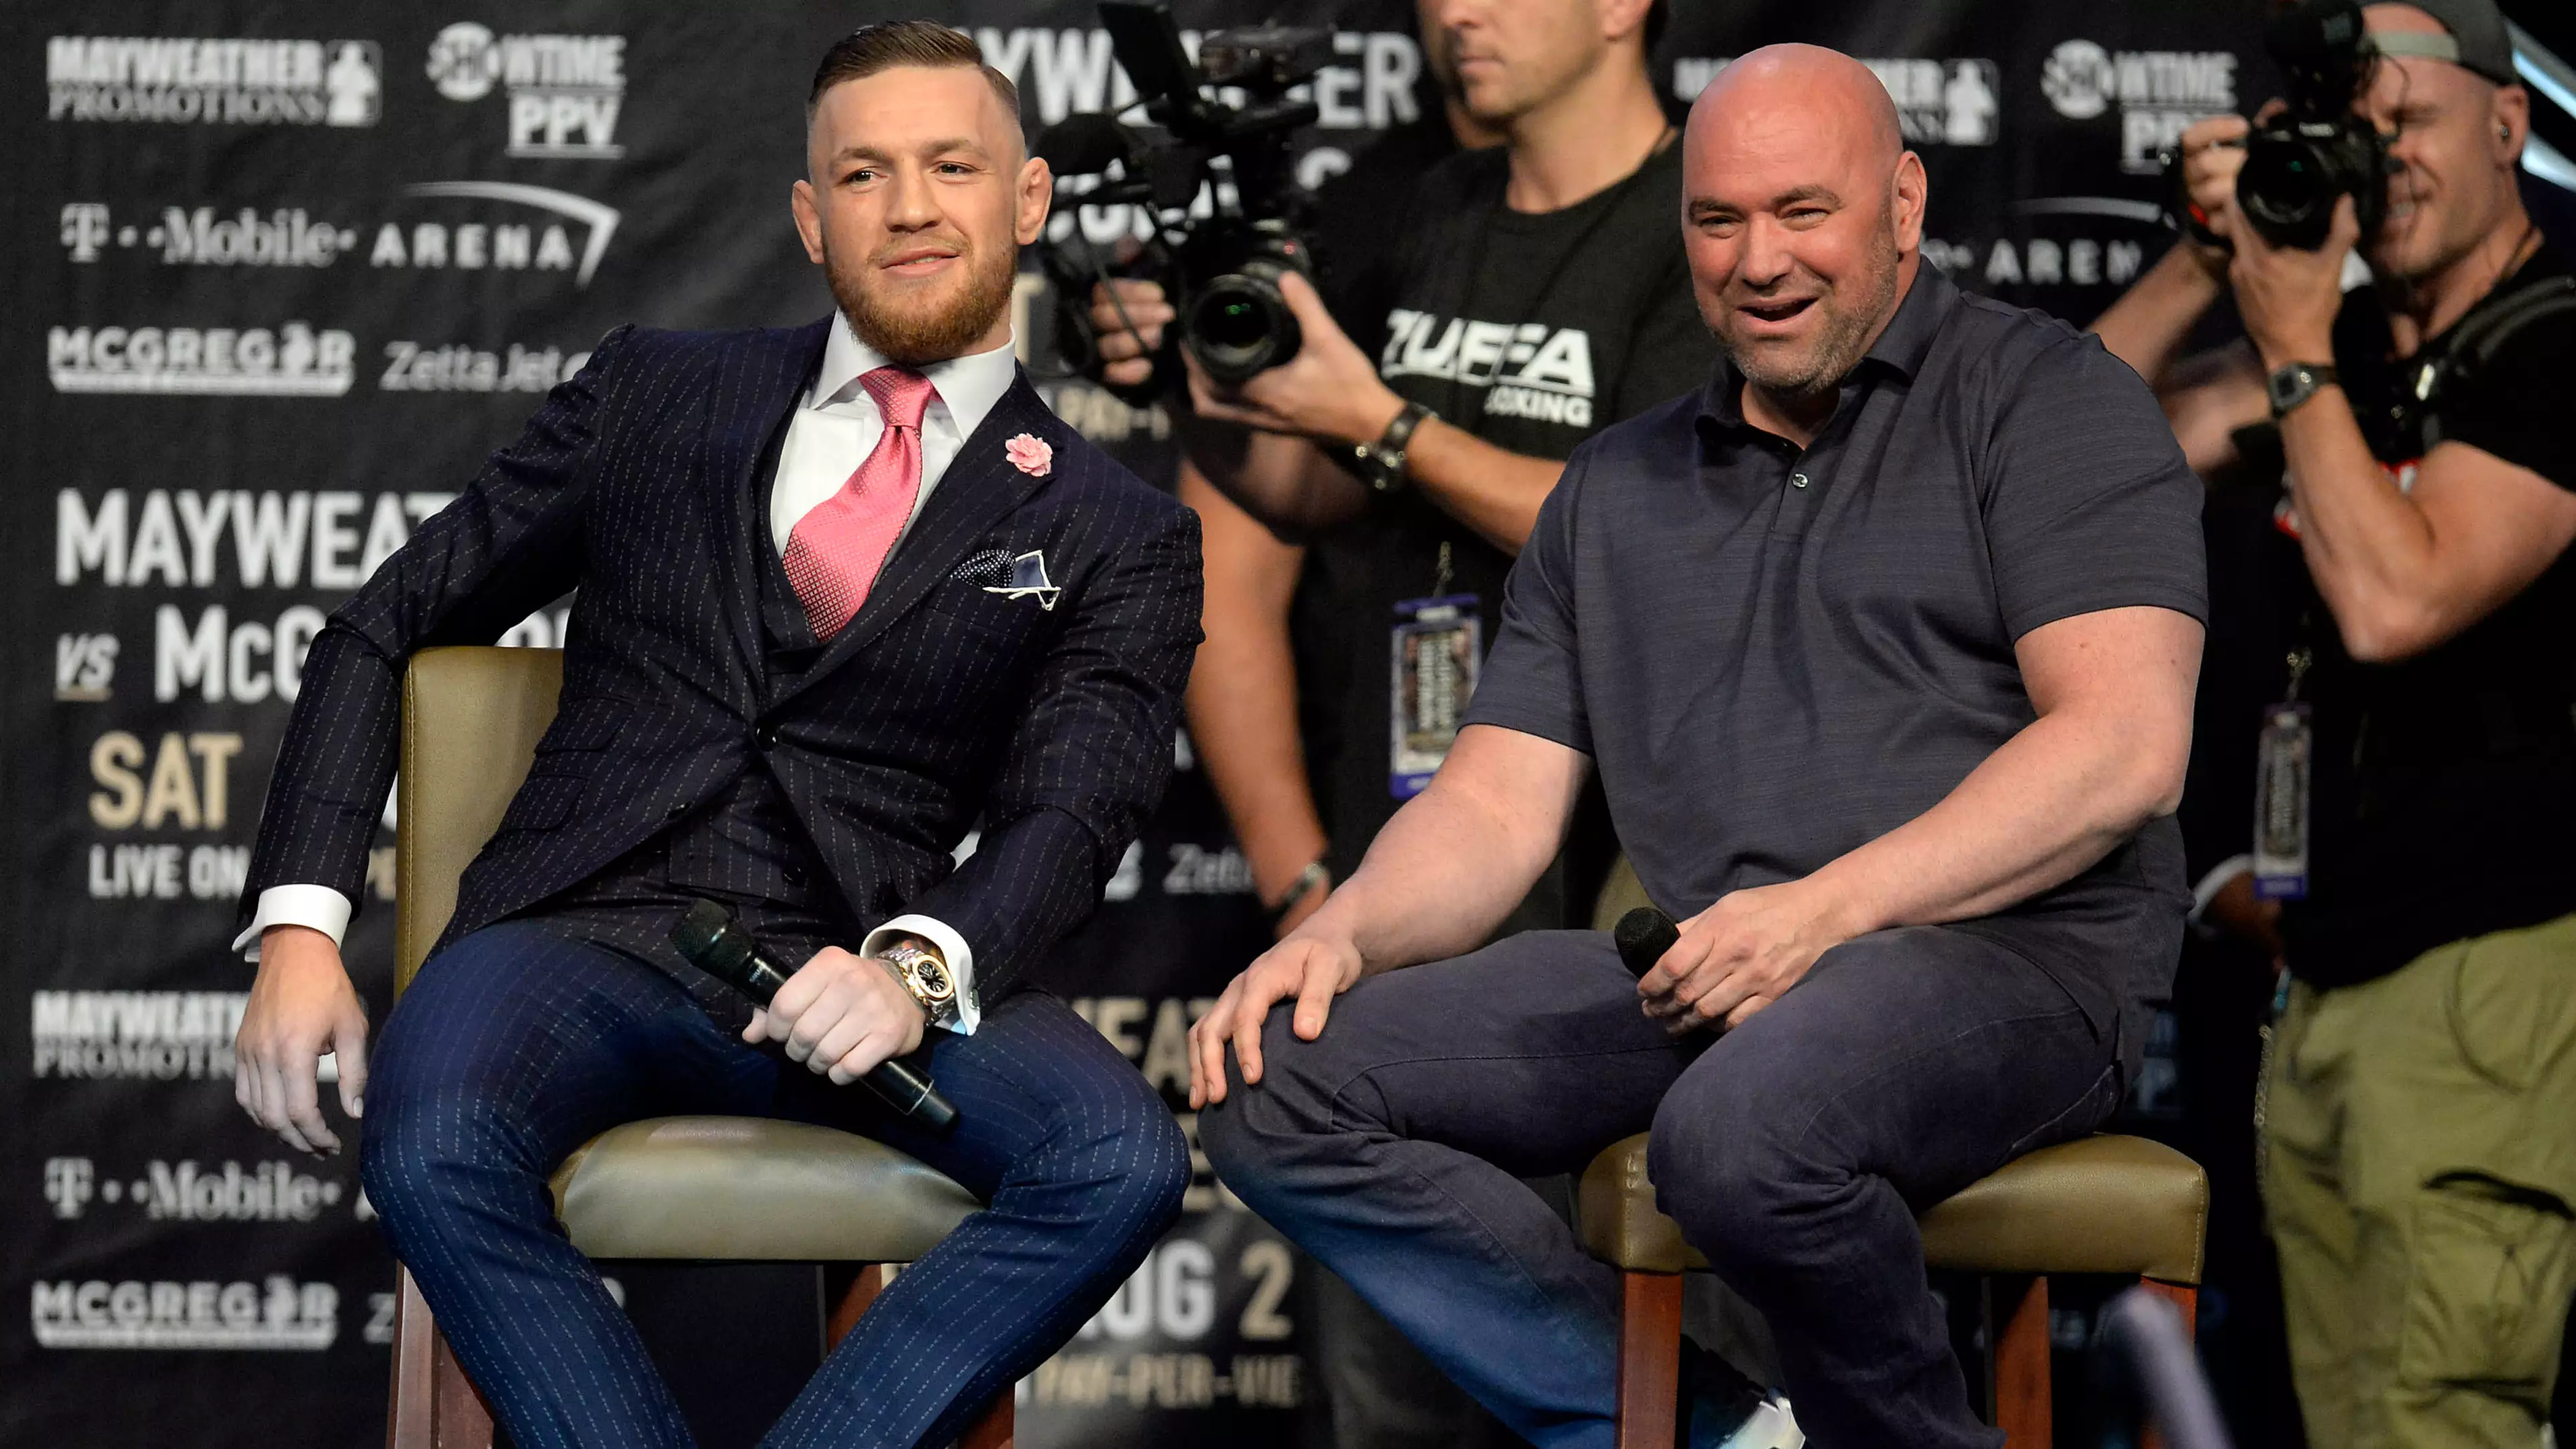 Dana White Responds To Conor McGregor Claiming He's Retired From MMA